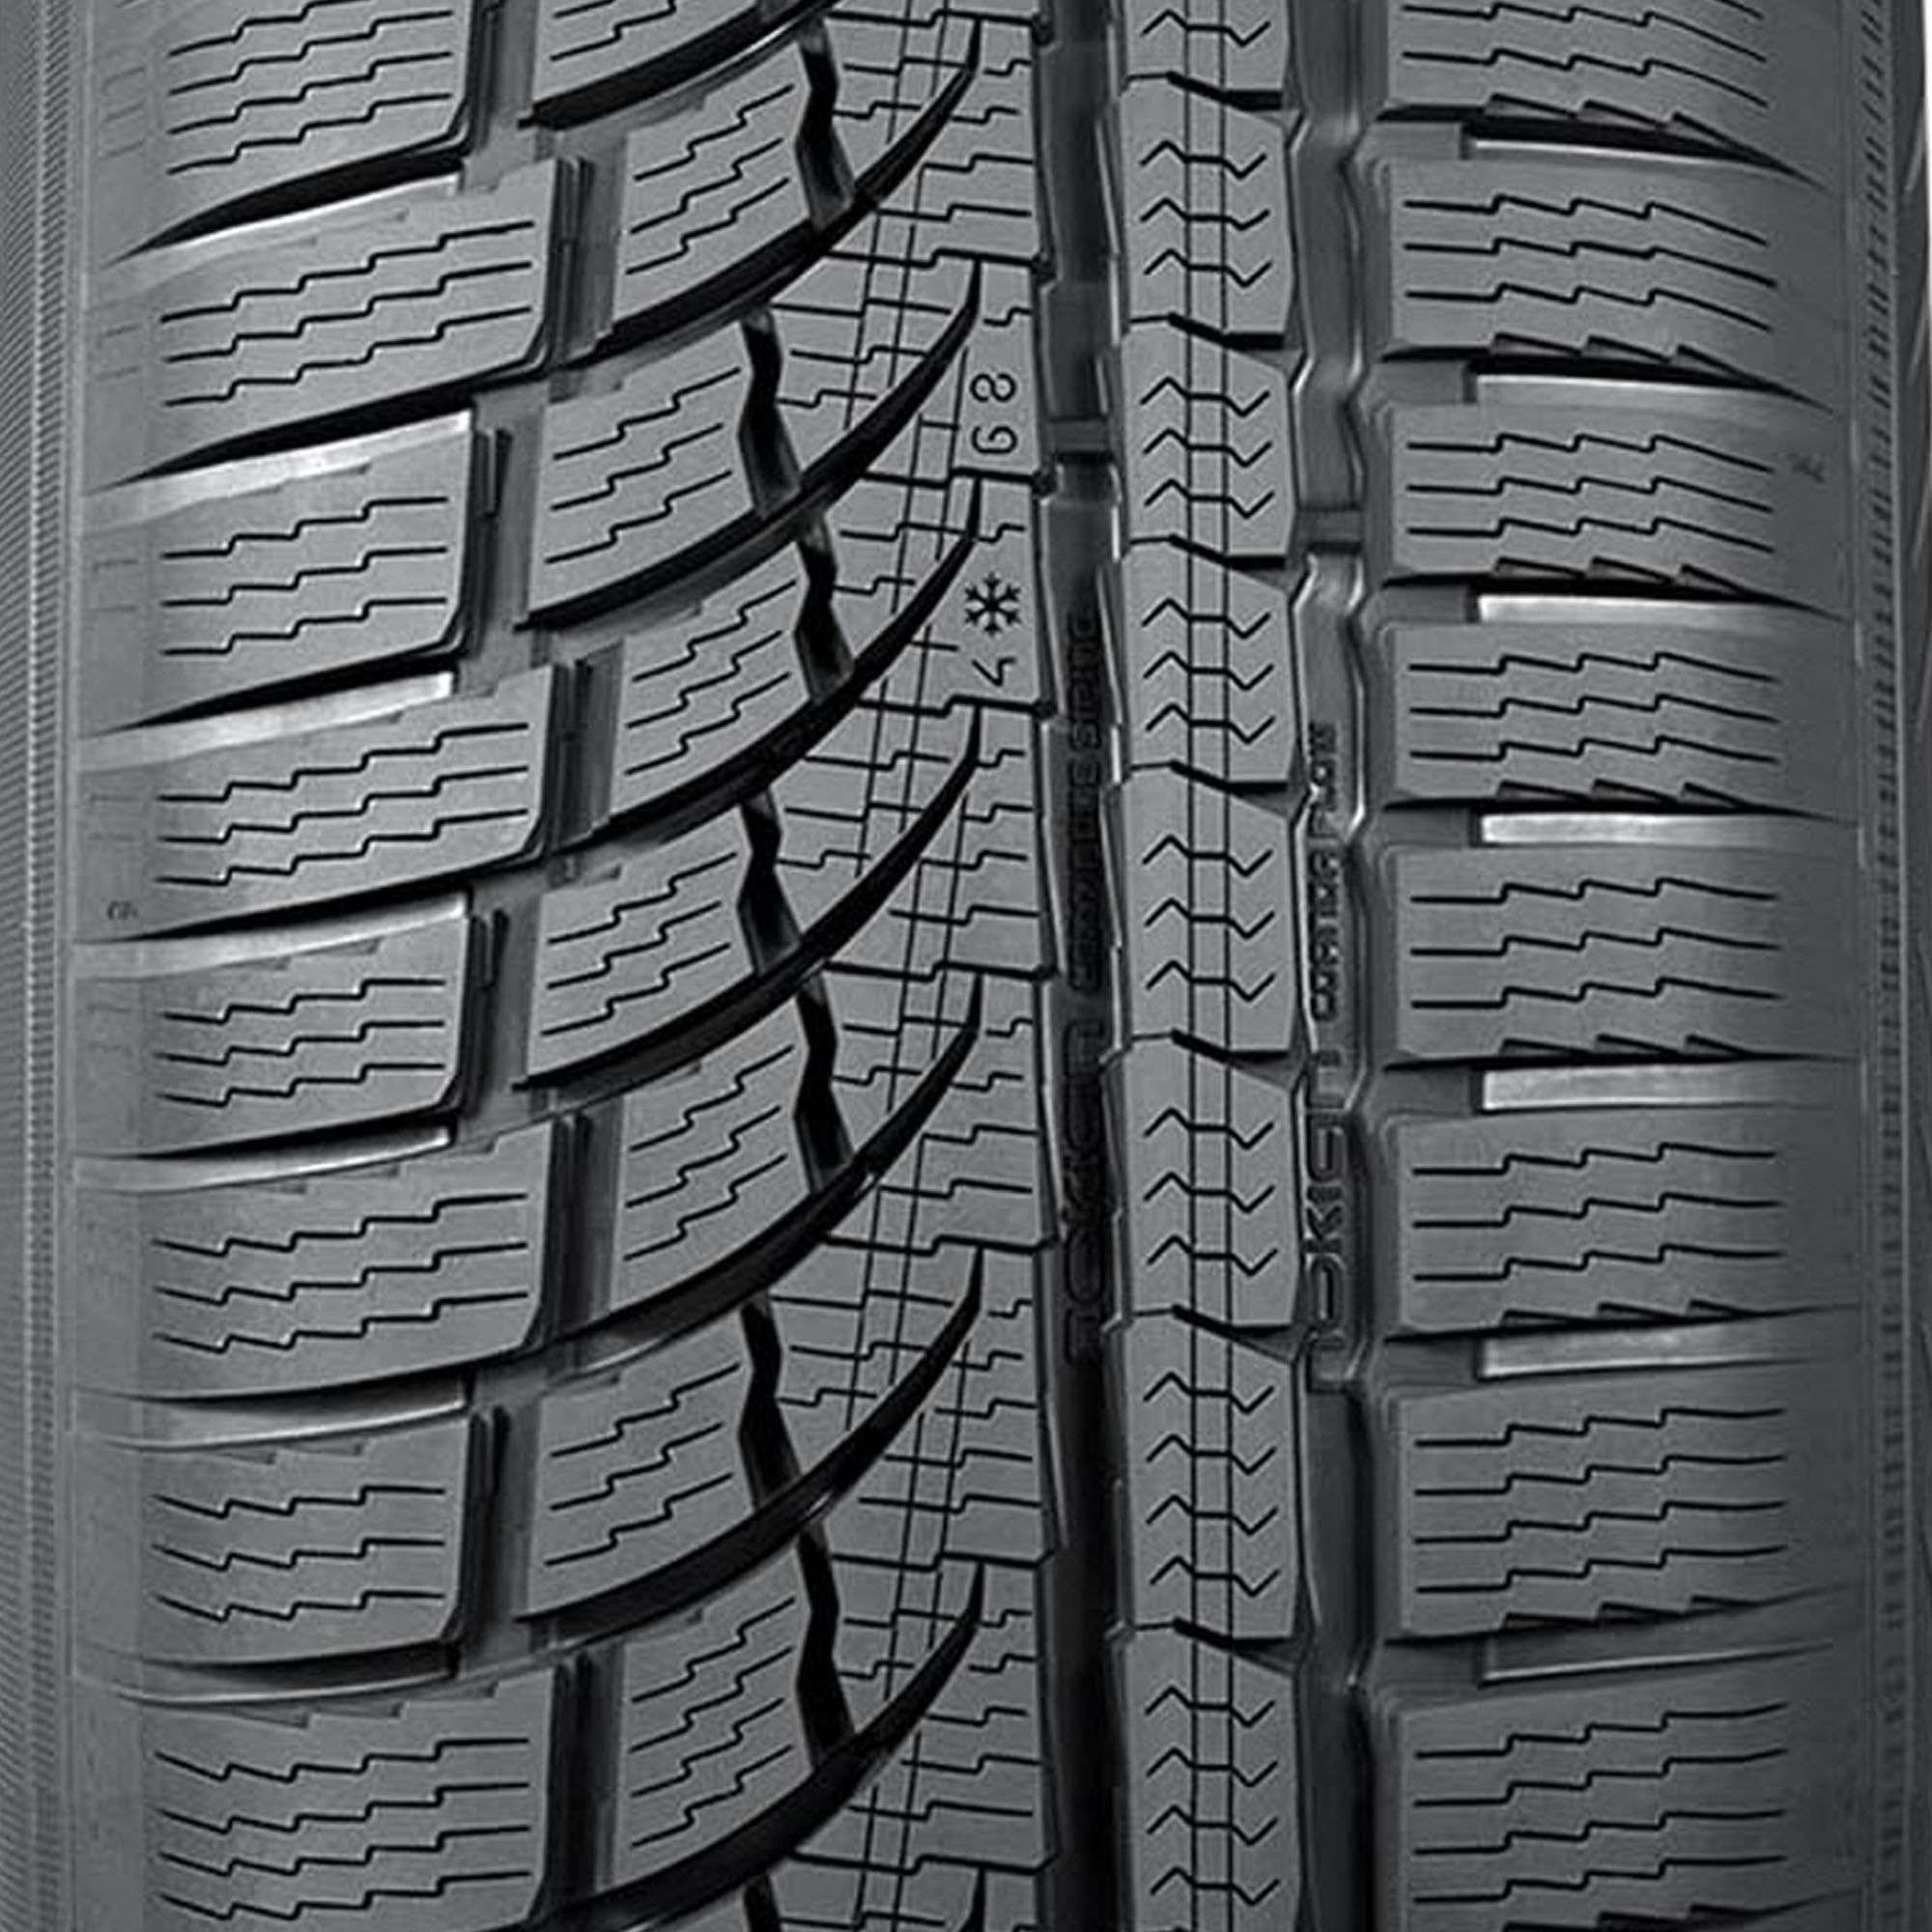 Nokian WR G4 SUV All Weather 265/60R18 114H XL SUV/Crossover Tire